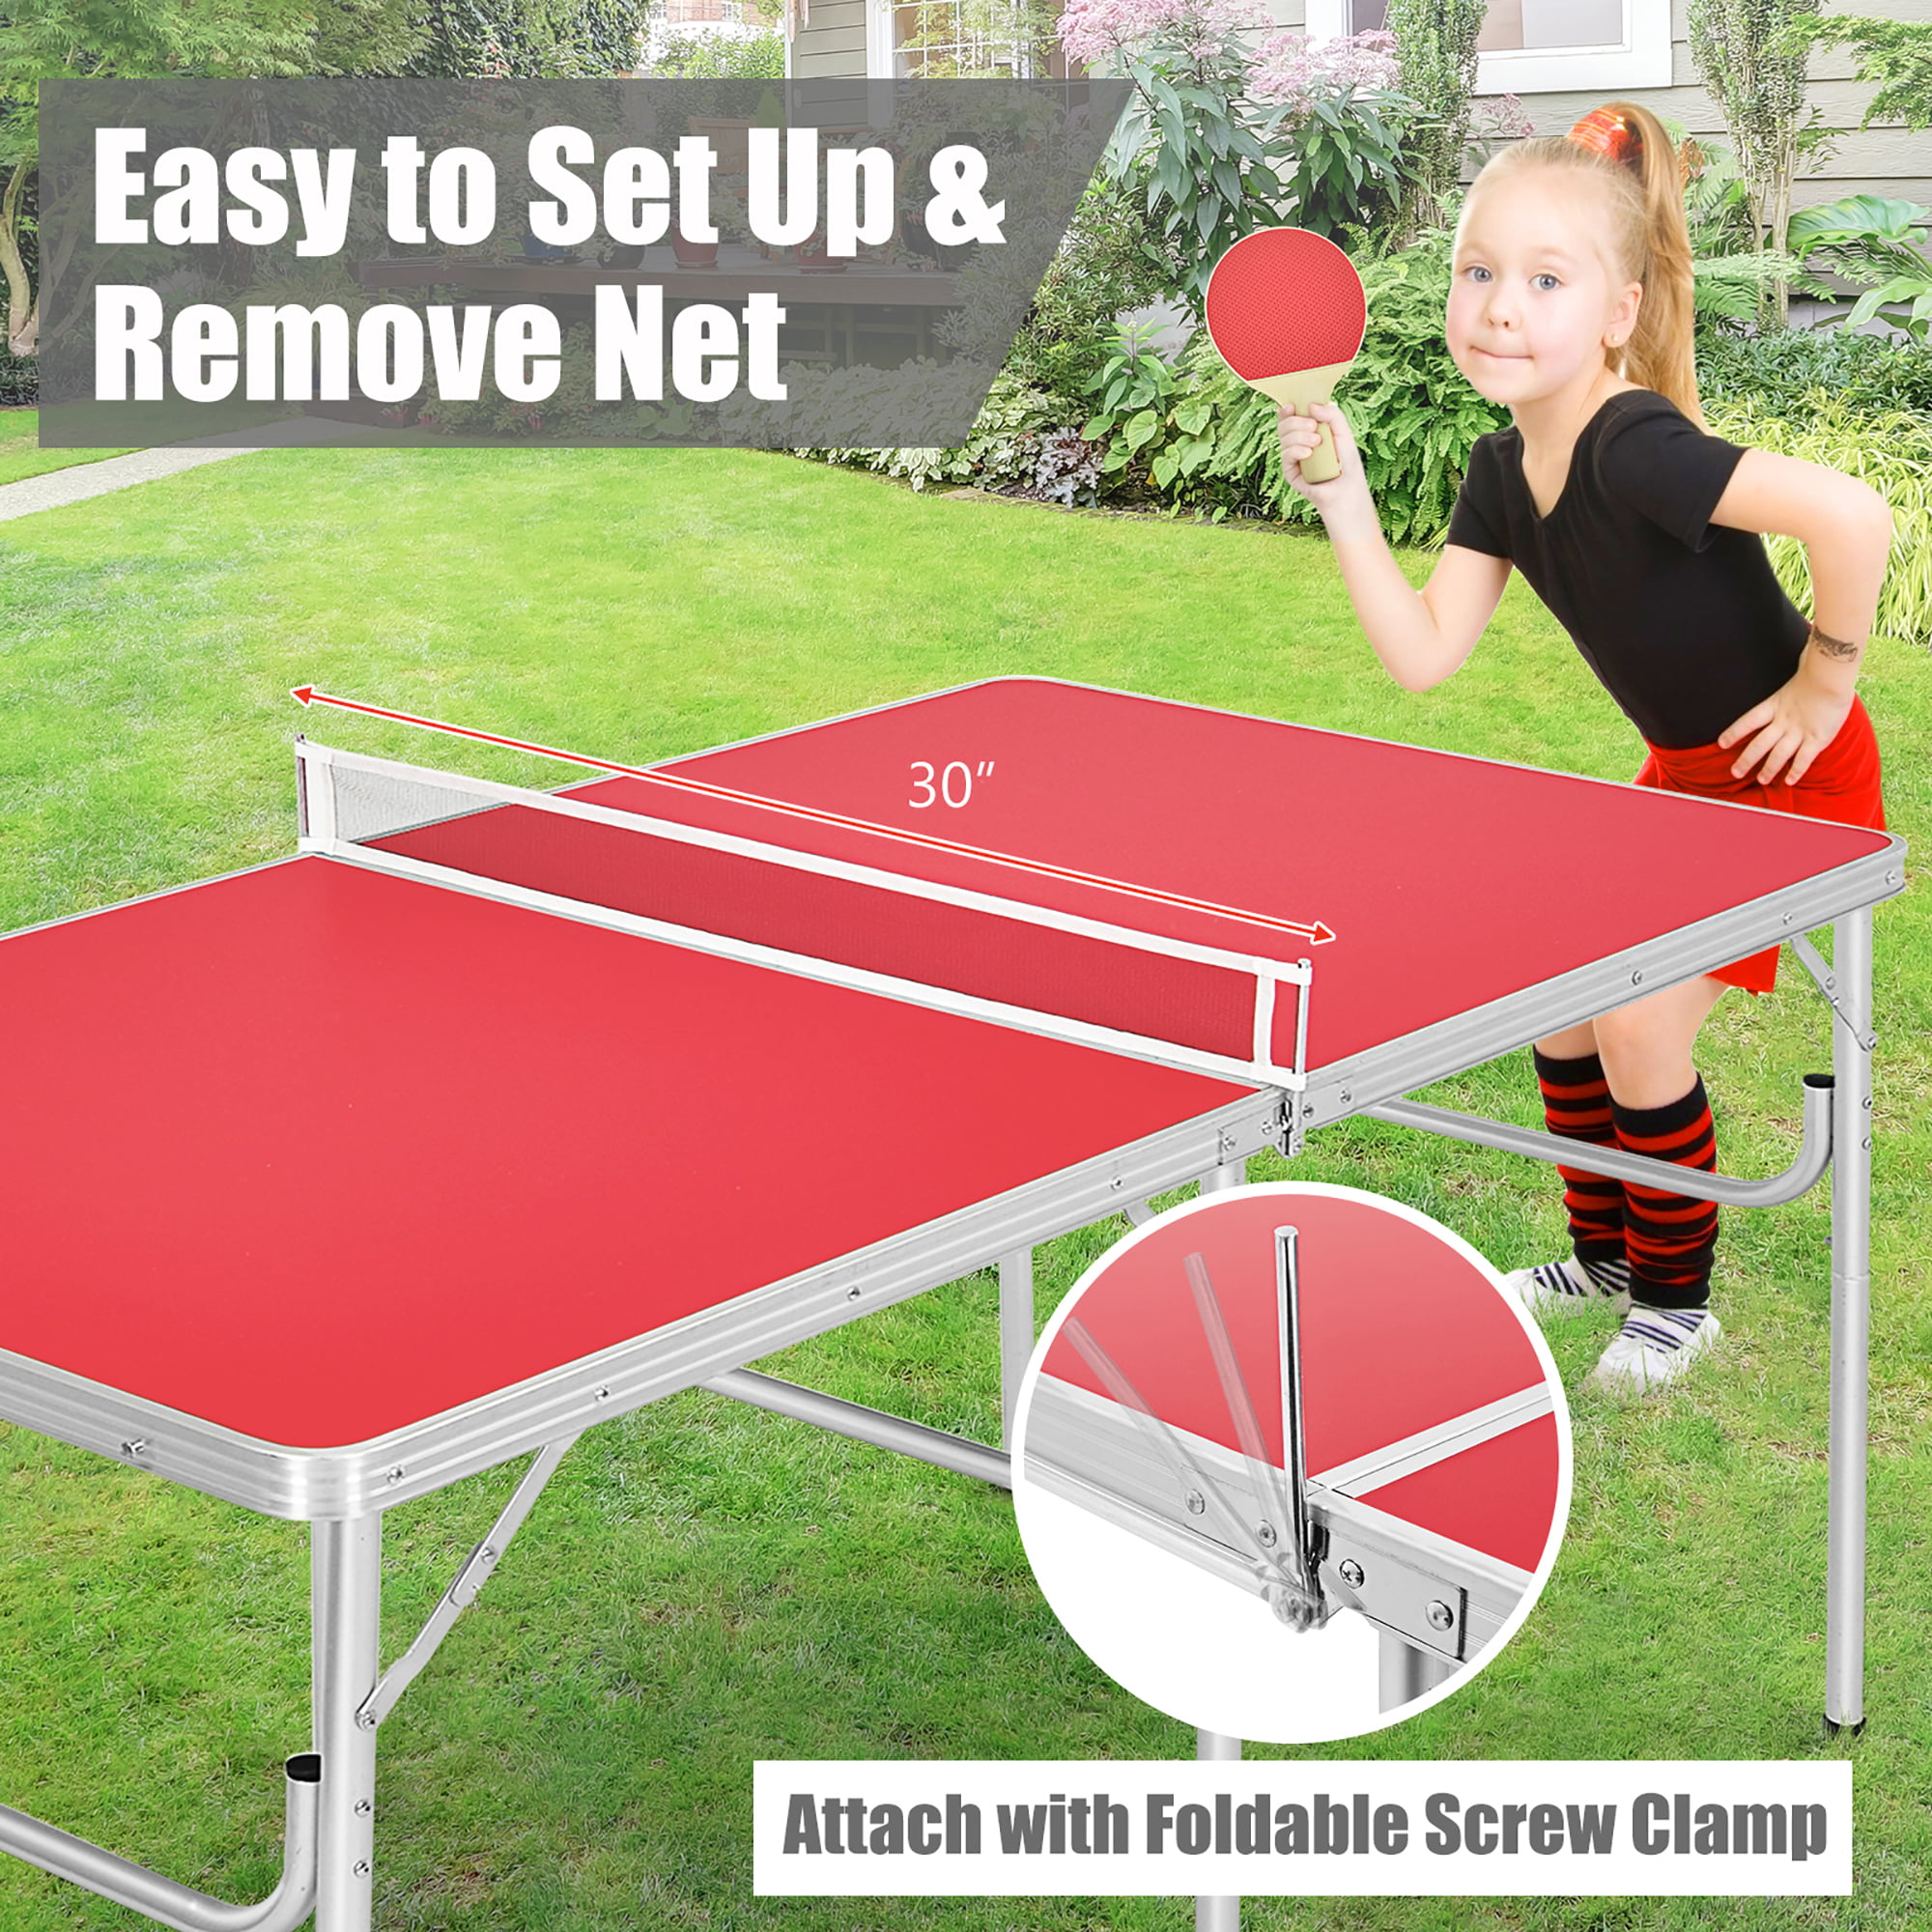 60” Portable Table Tennis Ping Pong Folding Table w/Accessories Indoor Game 